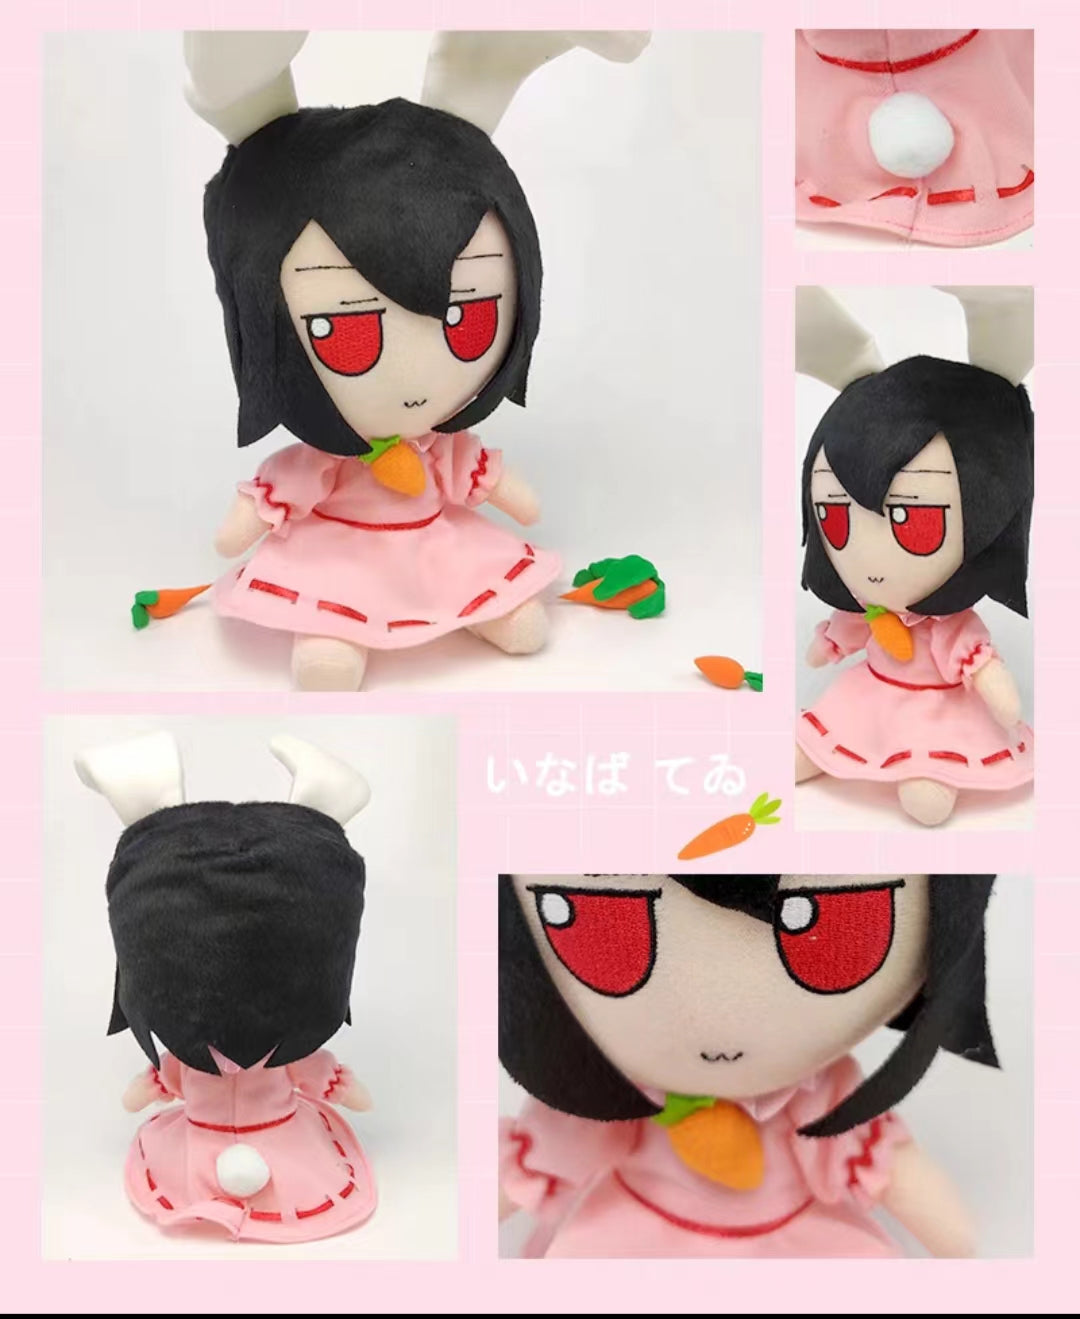 Inaba Tewi Plush Toy [Touhou Project]